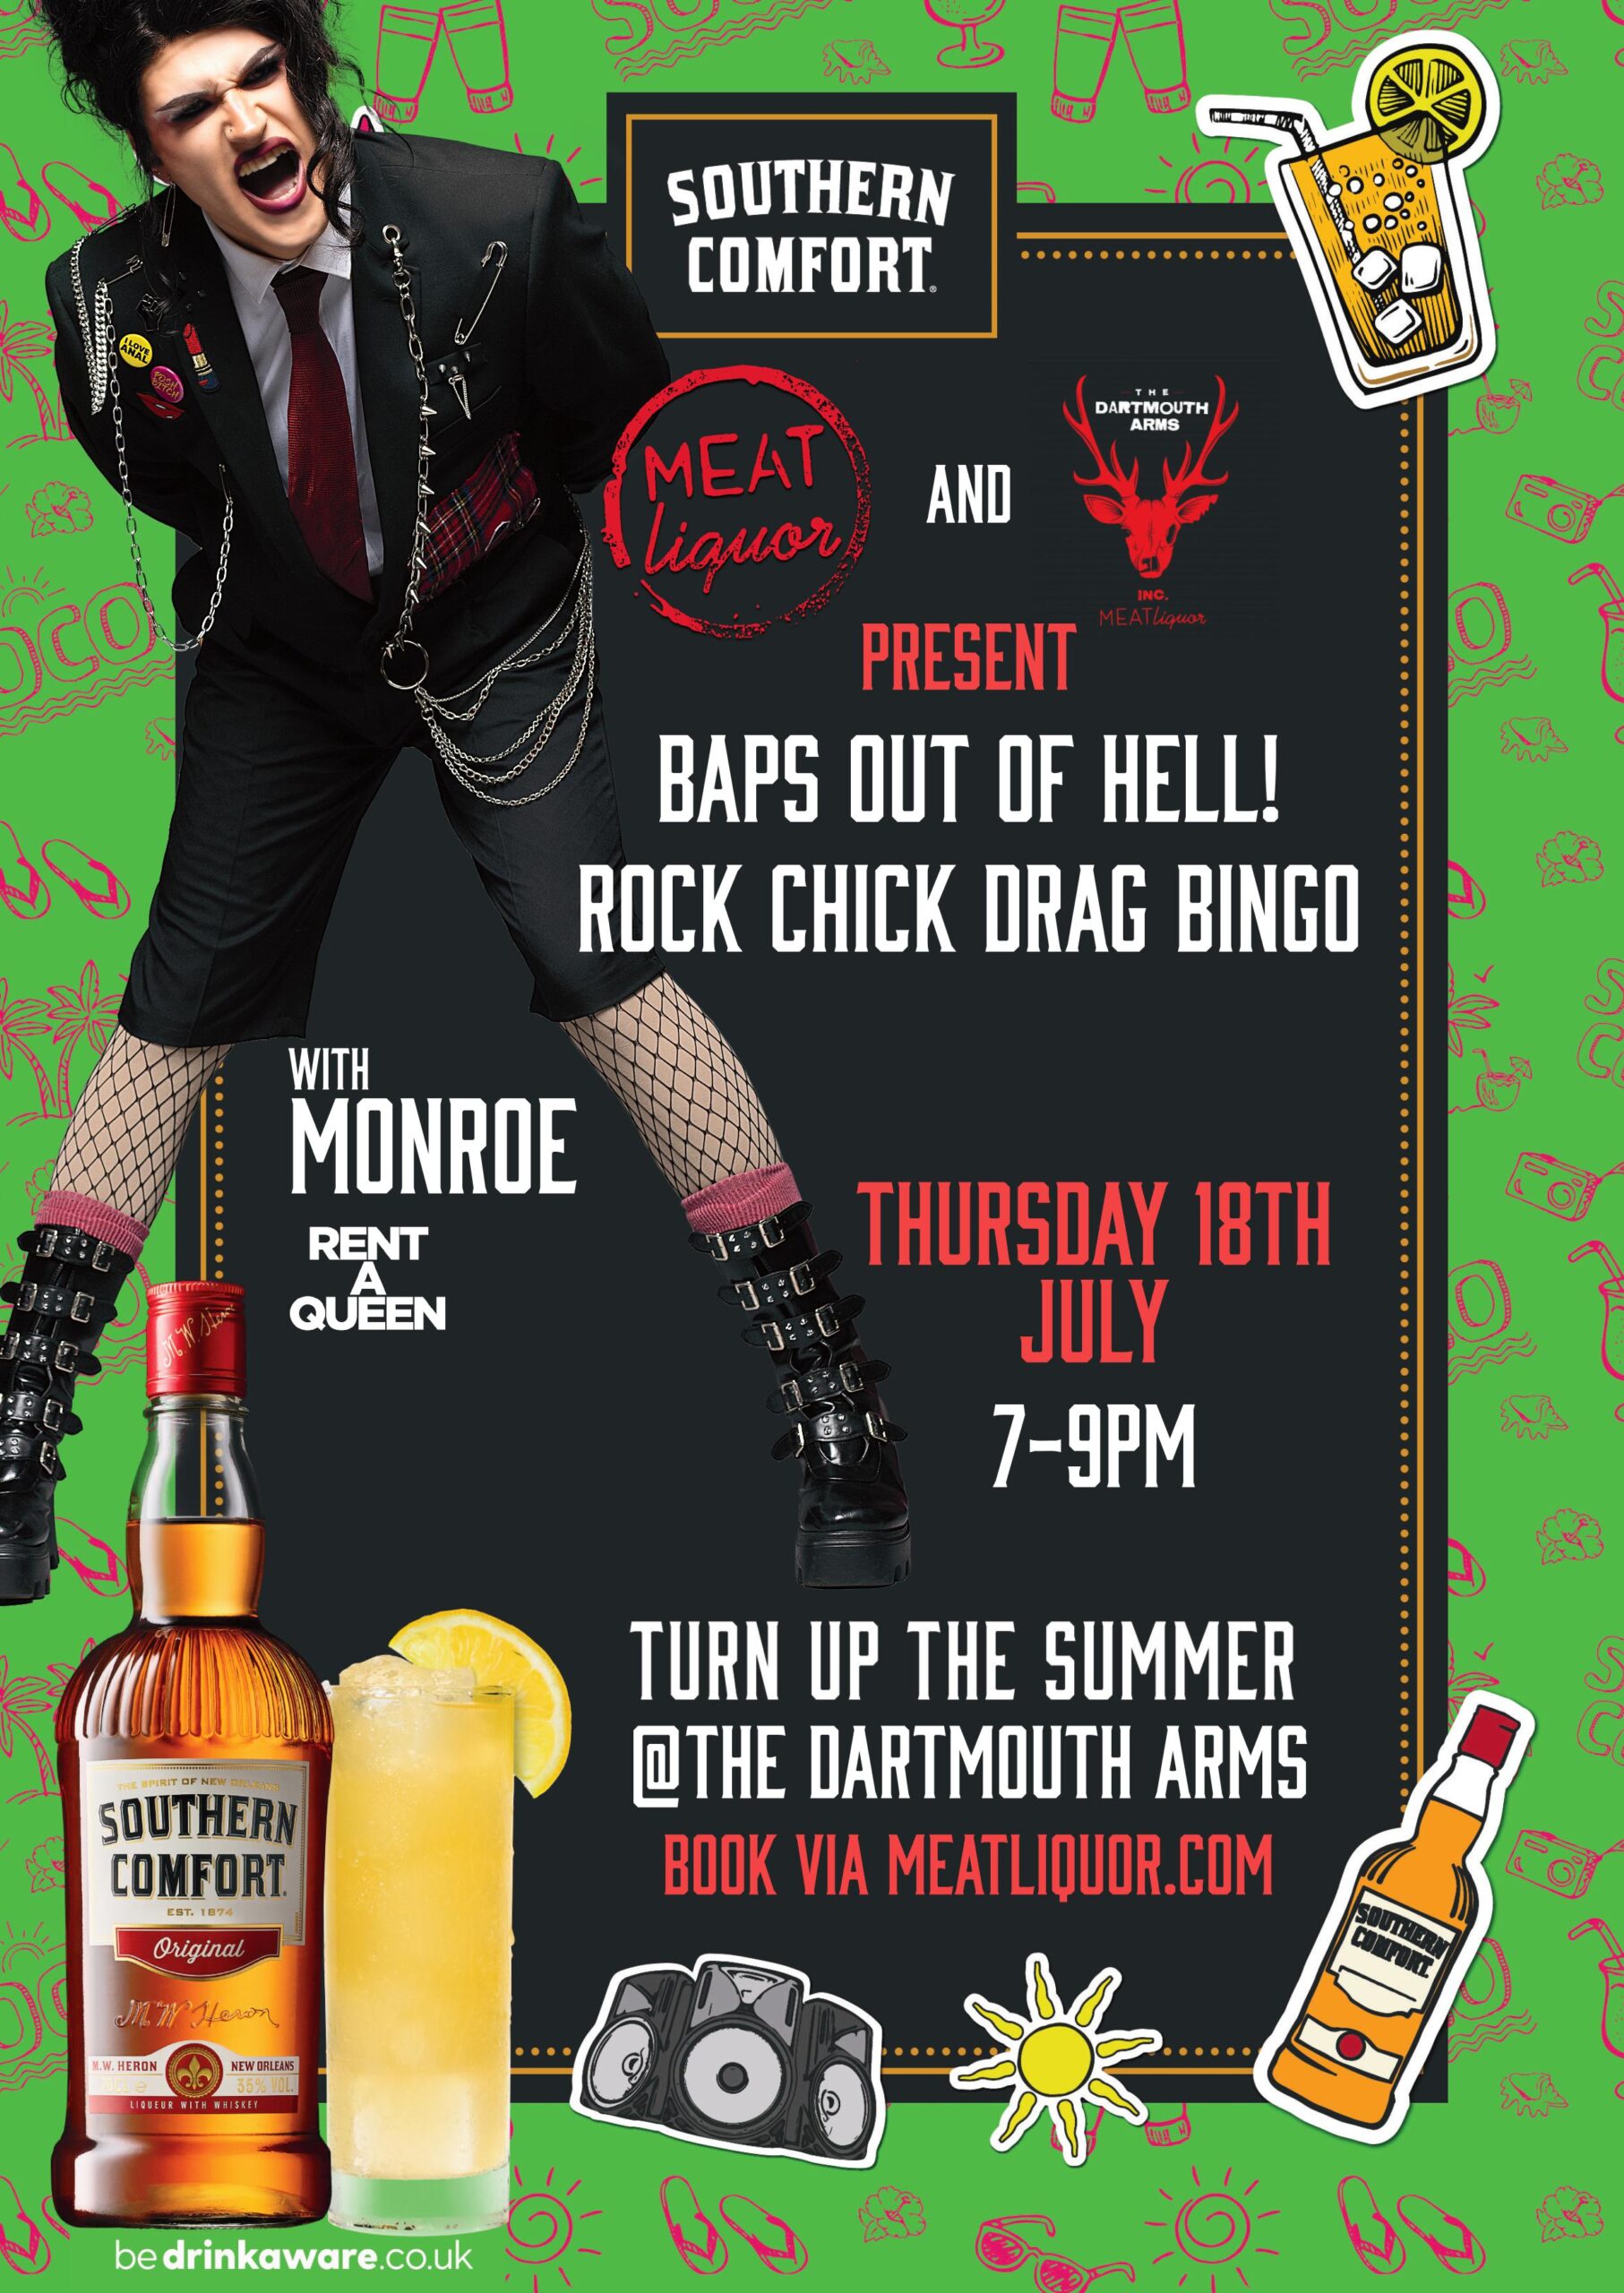 Drag Bingo on Thursday 18th July at The Dartmouth Arms